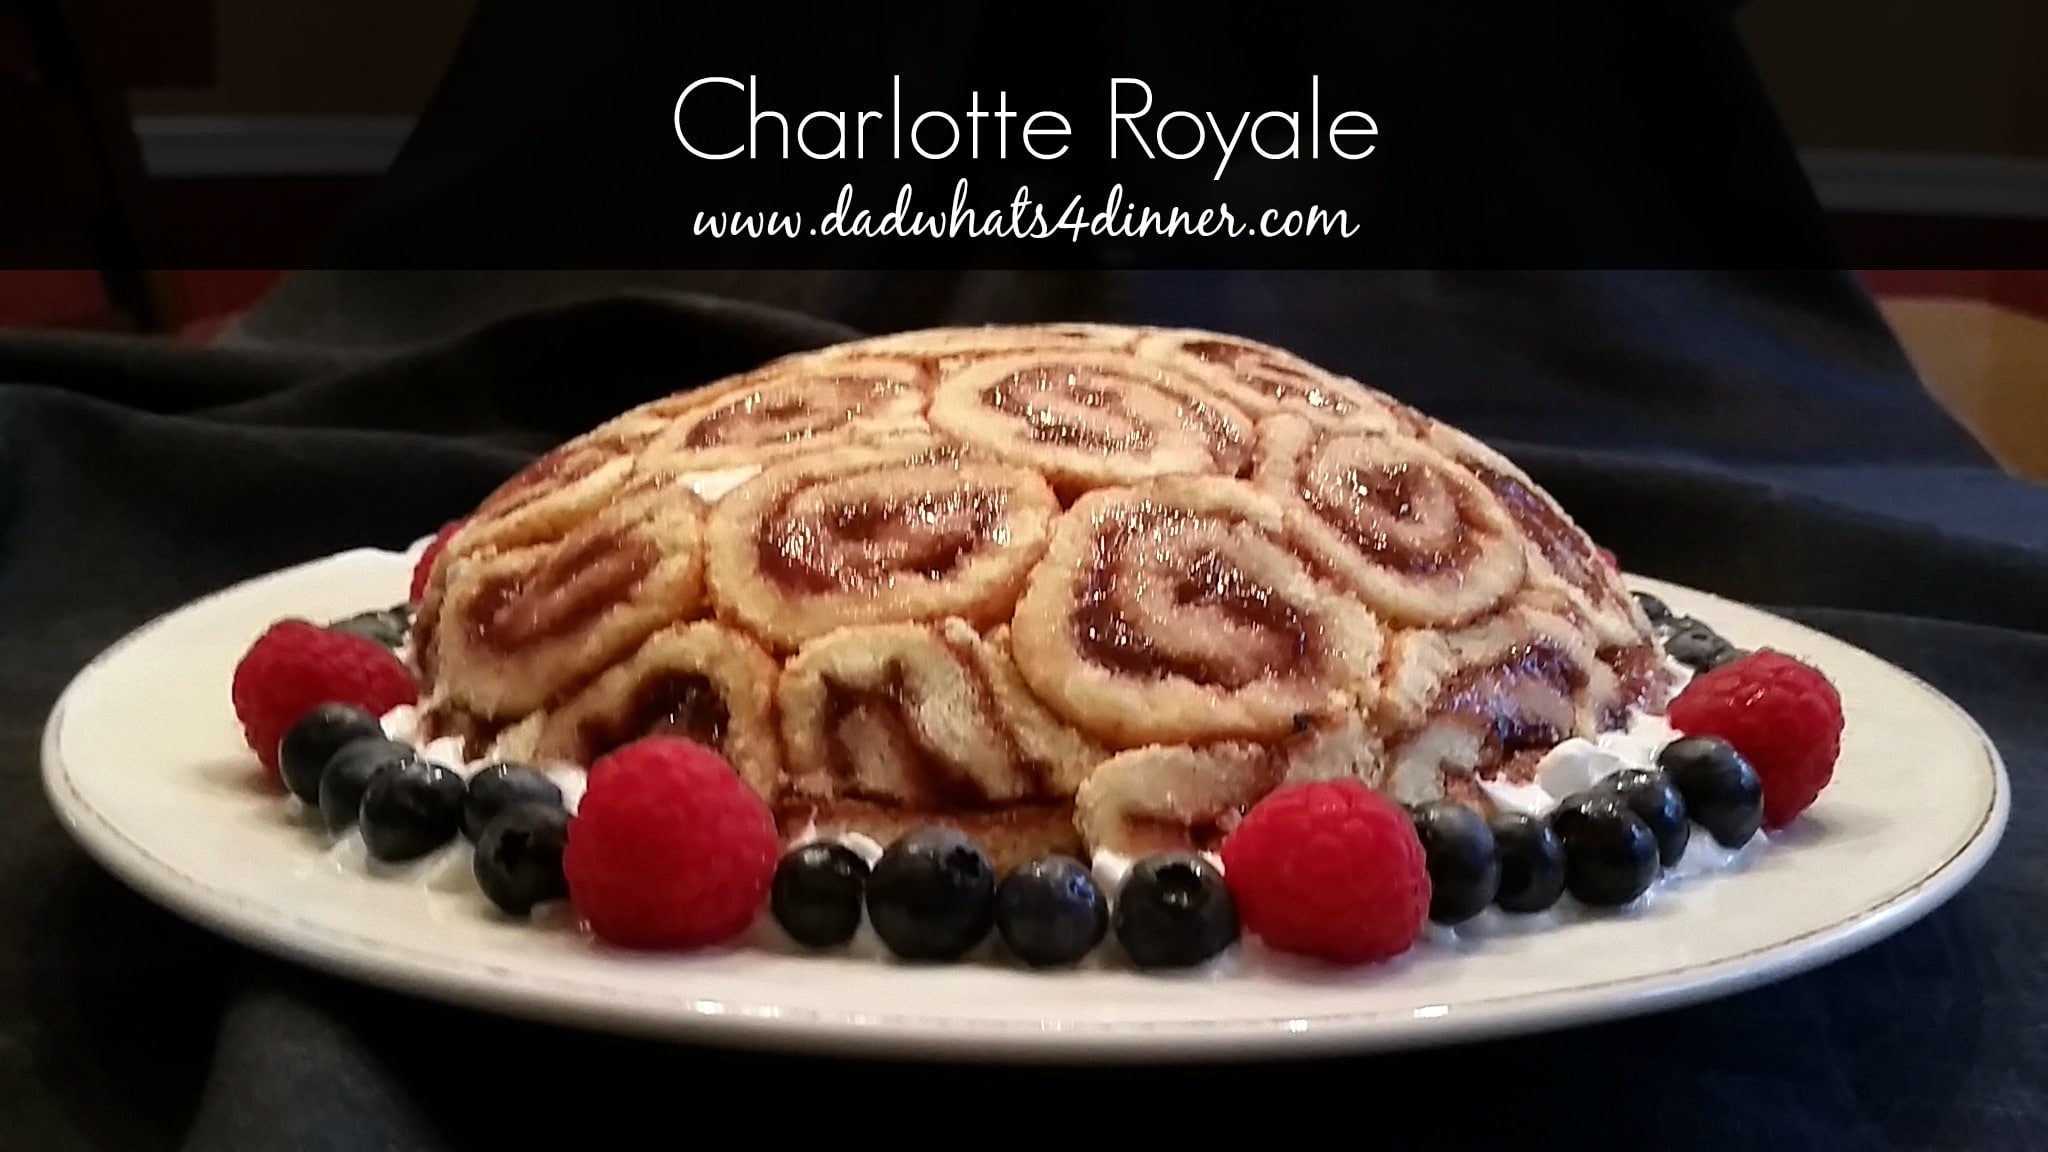 Charlotte Royale – Here's the Dish